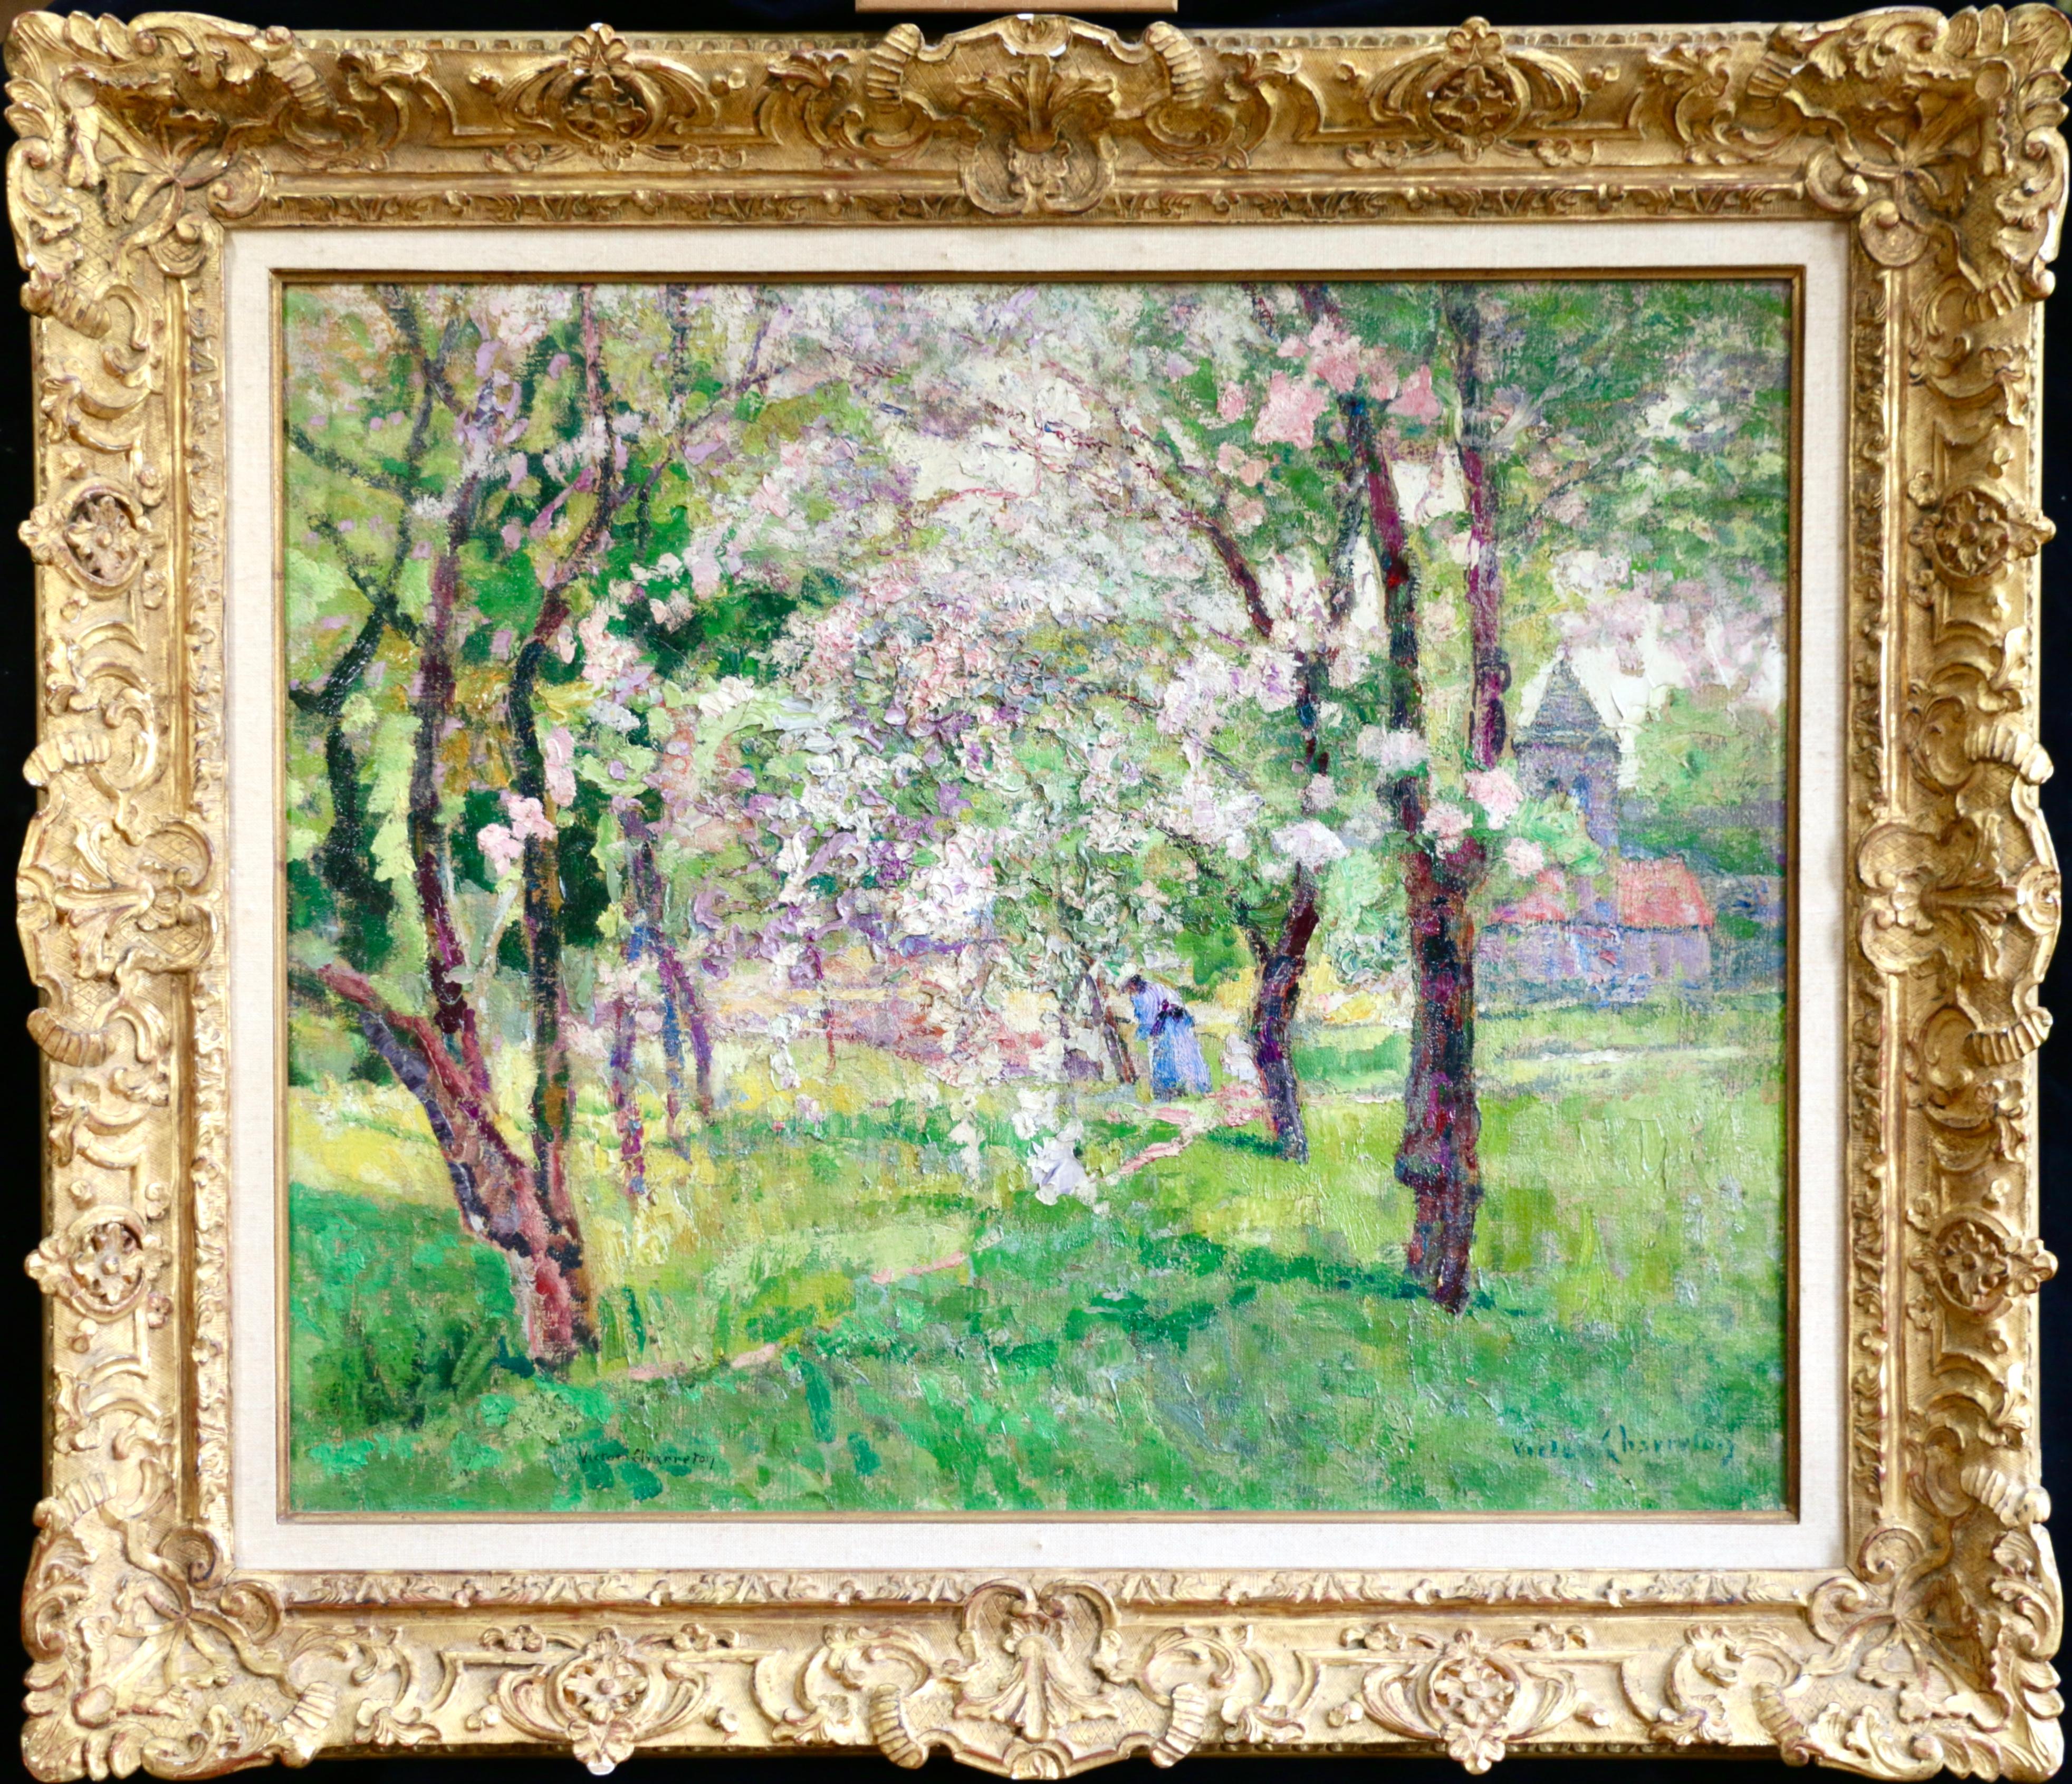 Victor Charreton Figurative Painting - In the Orchard - 19th Century Oil, Figure under Blossom Landscape by V Charreton